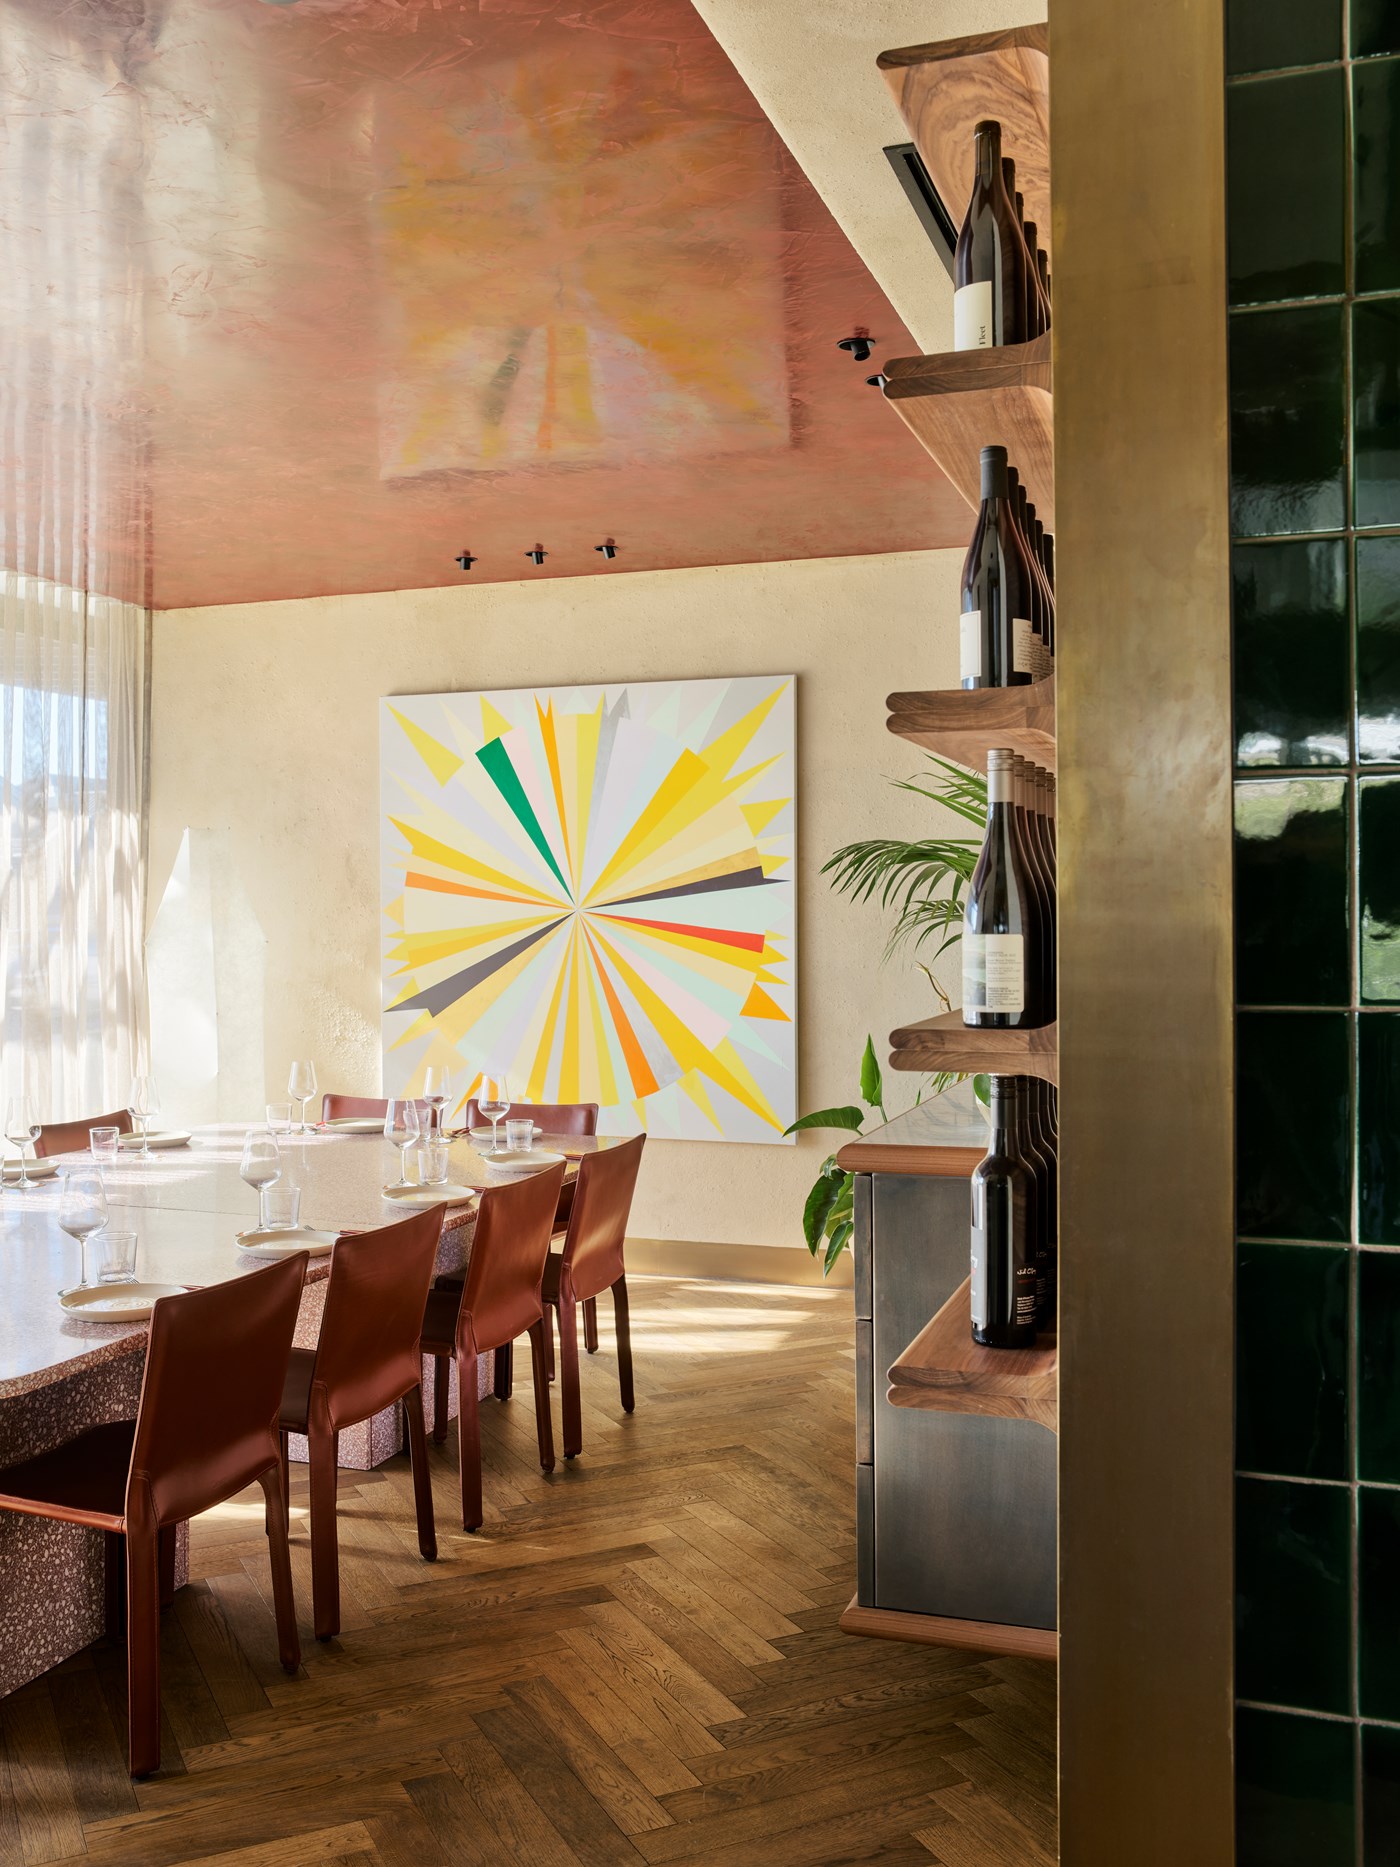 A stylish dining room with herringbone floors, leather chairs and a bright artwork against the wall 